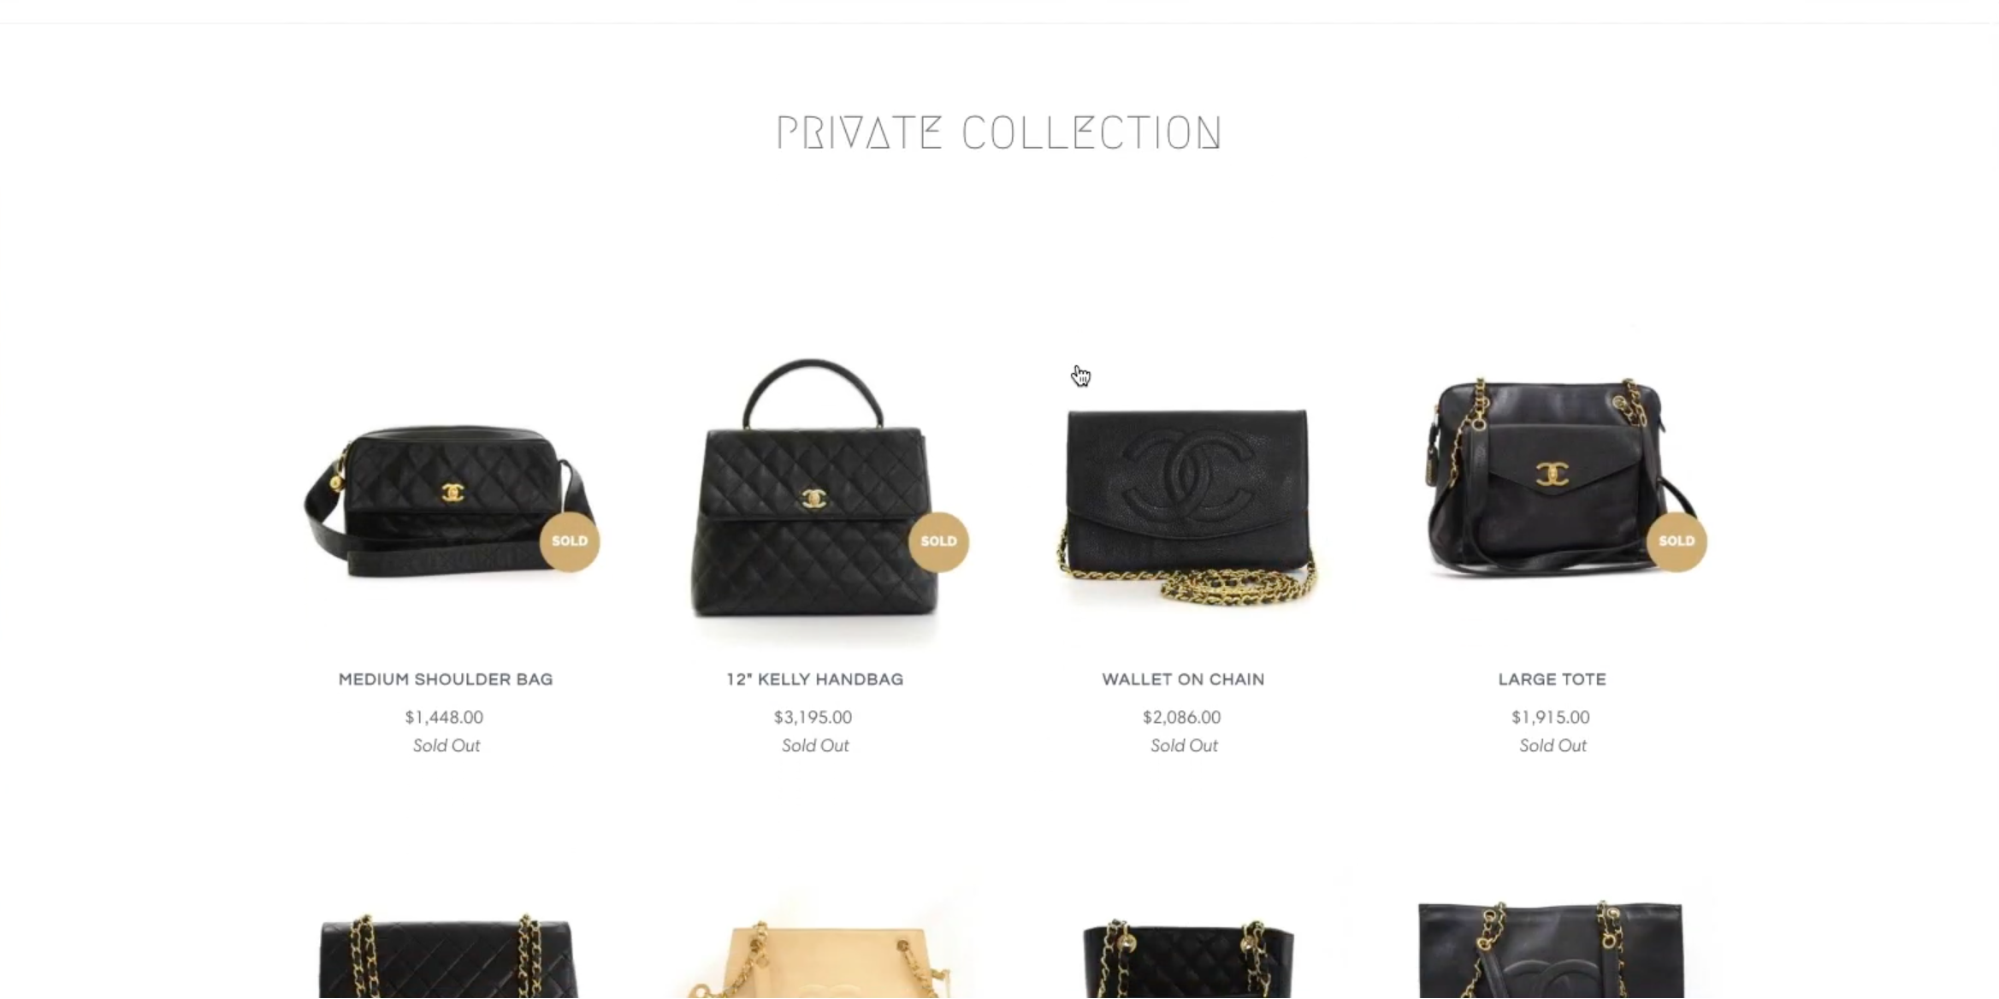 Screenshot of the private collection the customer sees because they are tagged with VIP